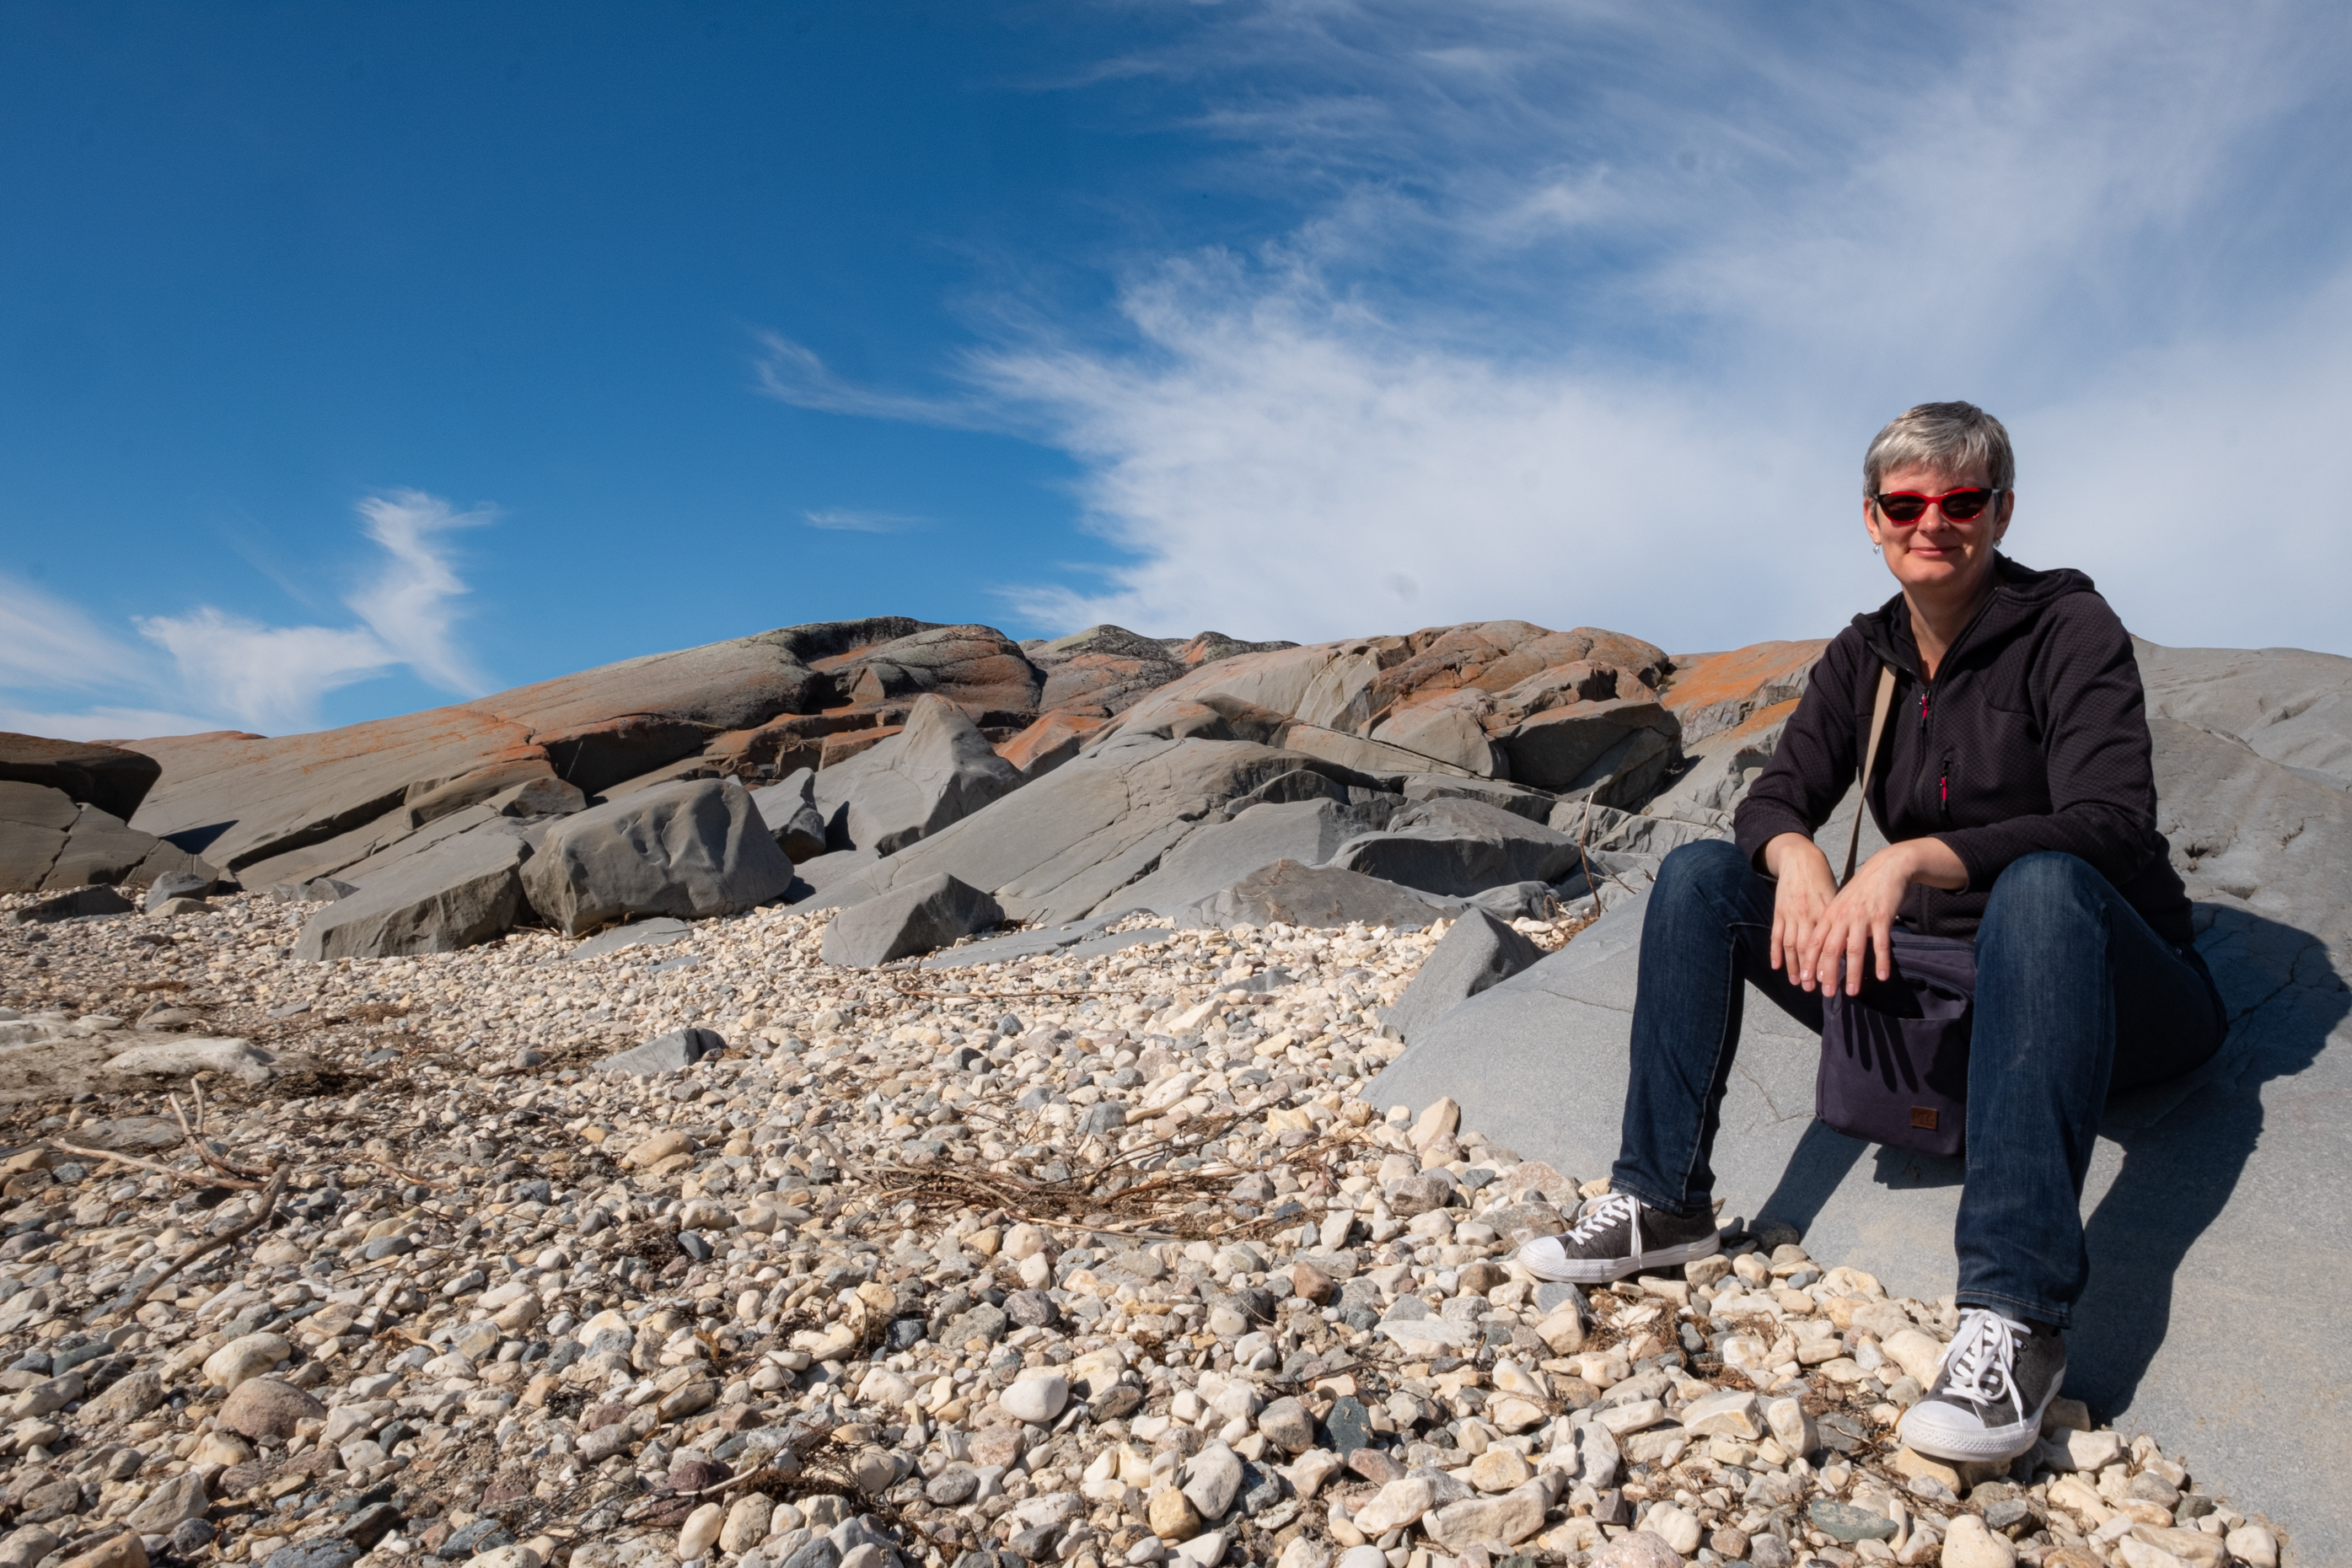 A woman with short grey hair wearing glasses smiles while sitting on a rocky landscape in northern Manitoba.